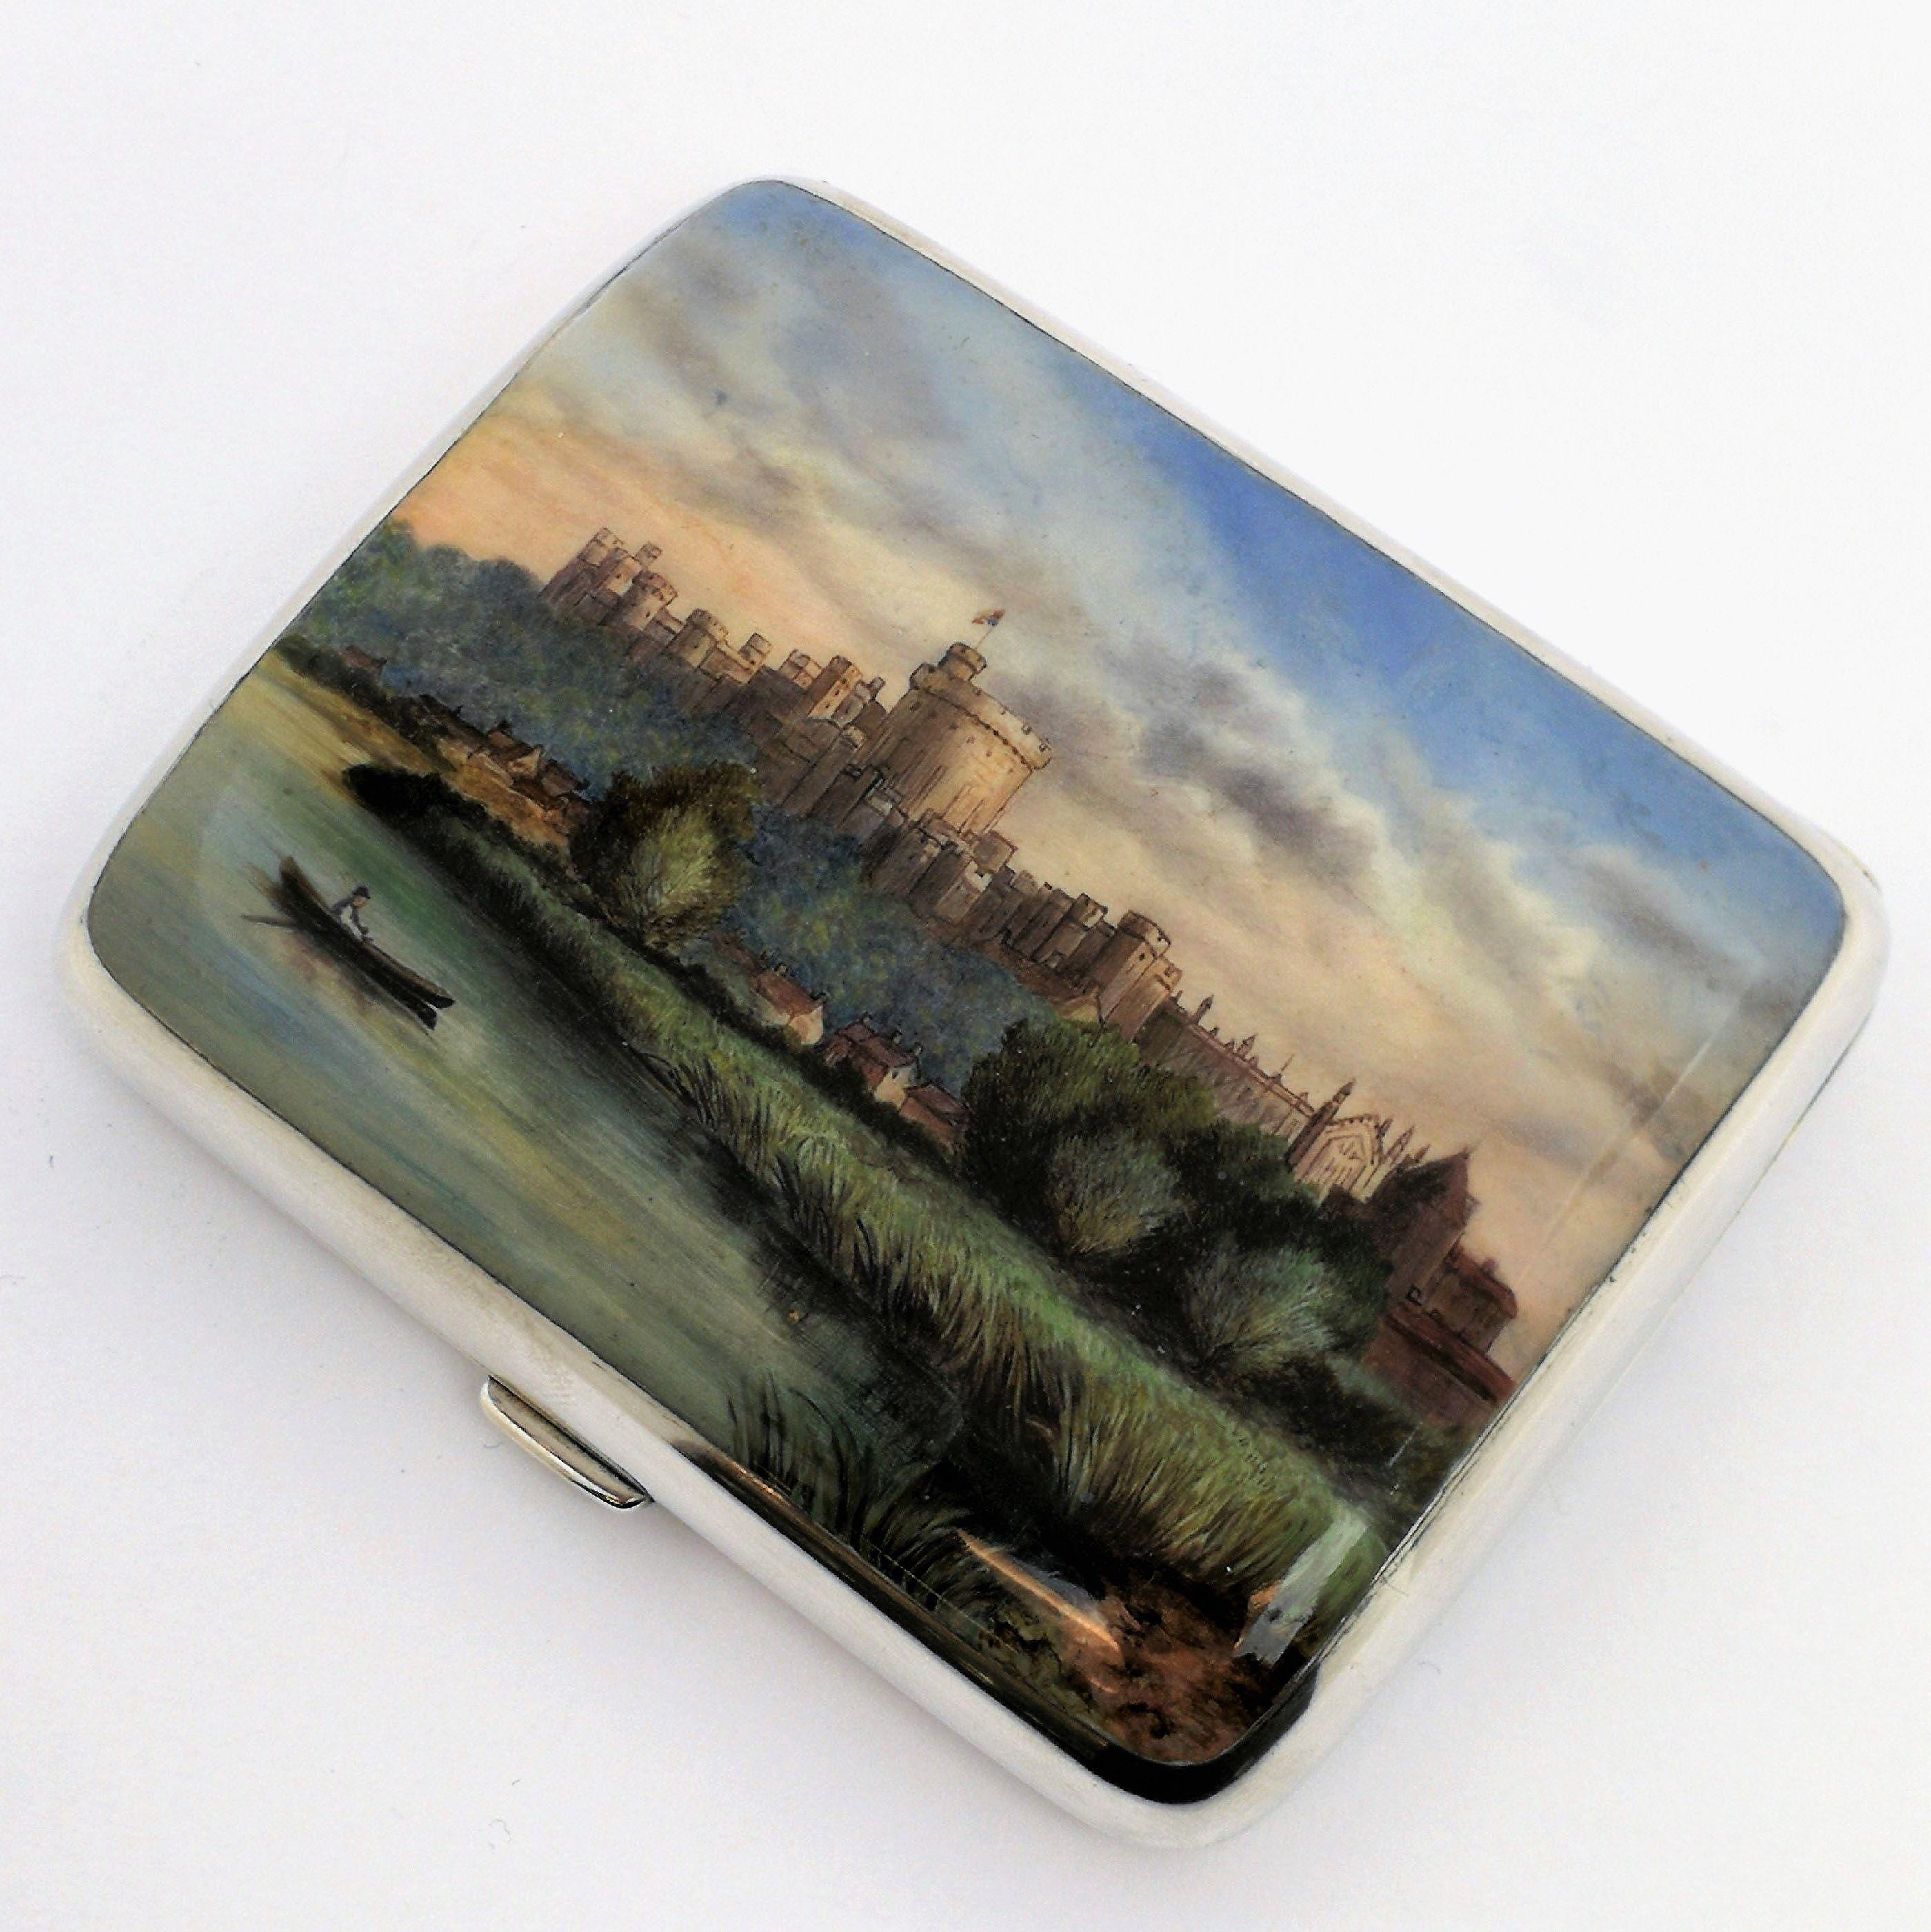 A gorgeous antique Victorian solid silver cigarette case featuring an enamelled image on the front cover showing a view of Windsor castle from the river. The image is created in a rich palette of colour and exquisite detail. The case has a plain